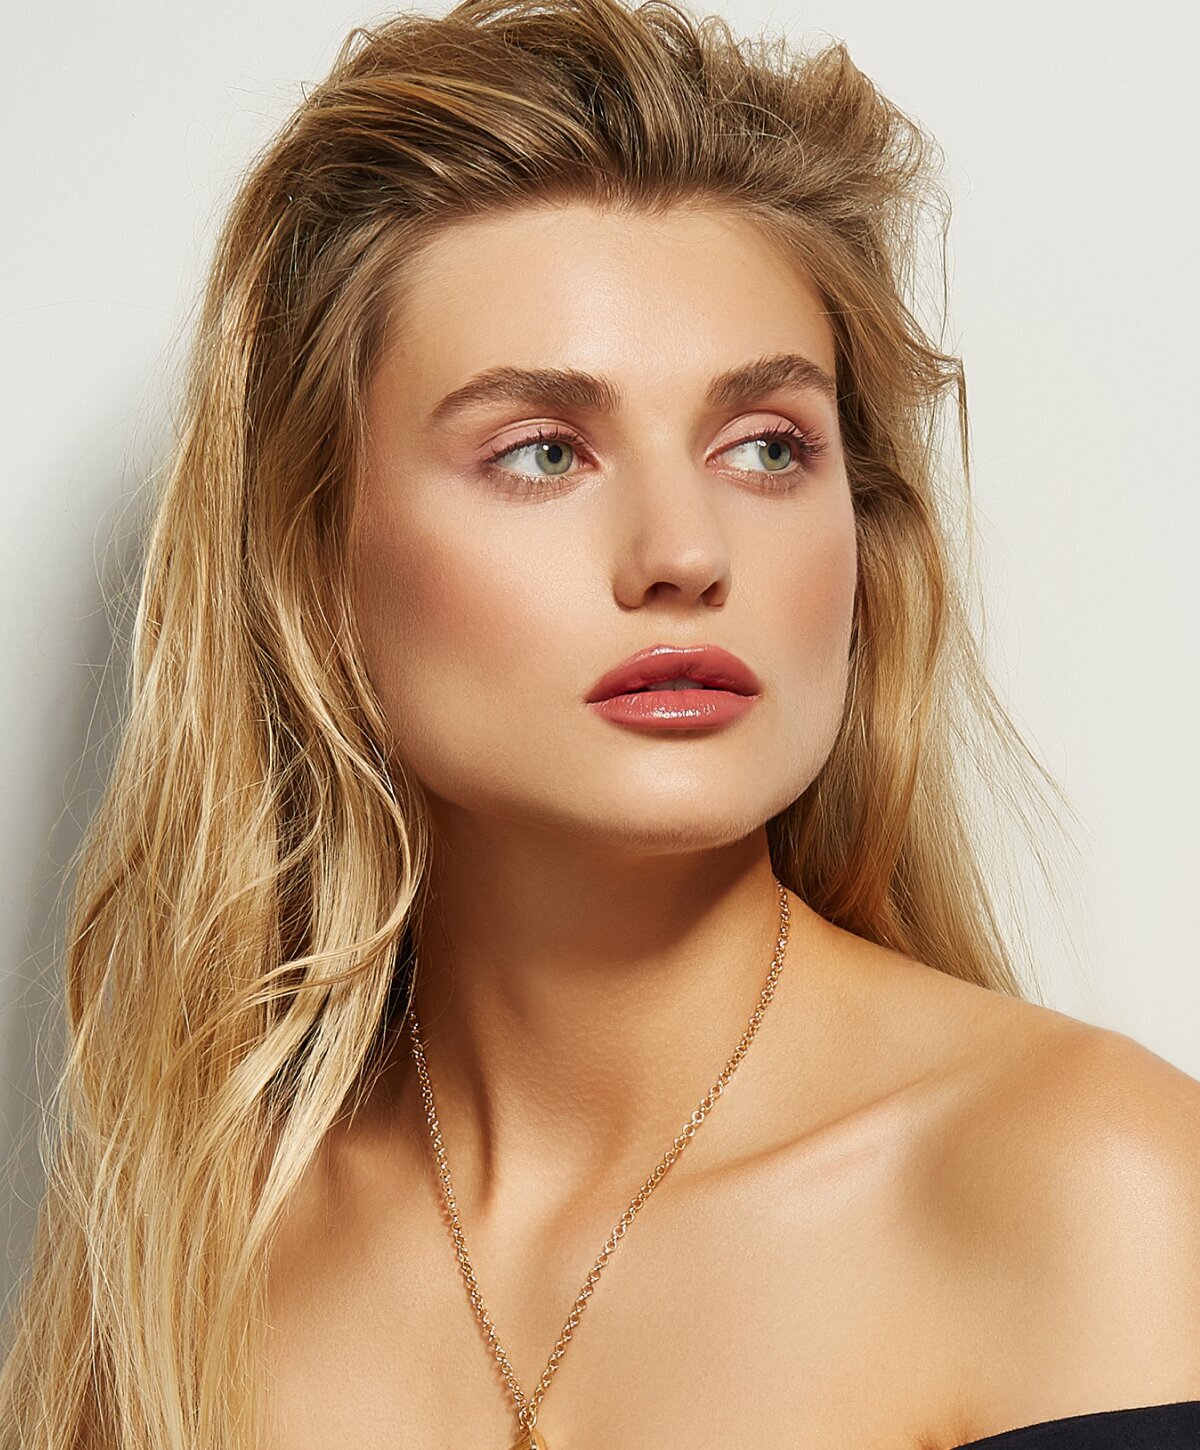 Beverly Hills revision rhinoplasty model with blonde hair